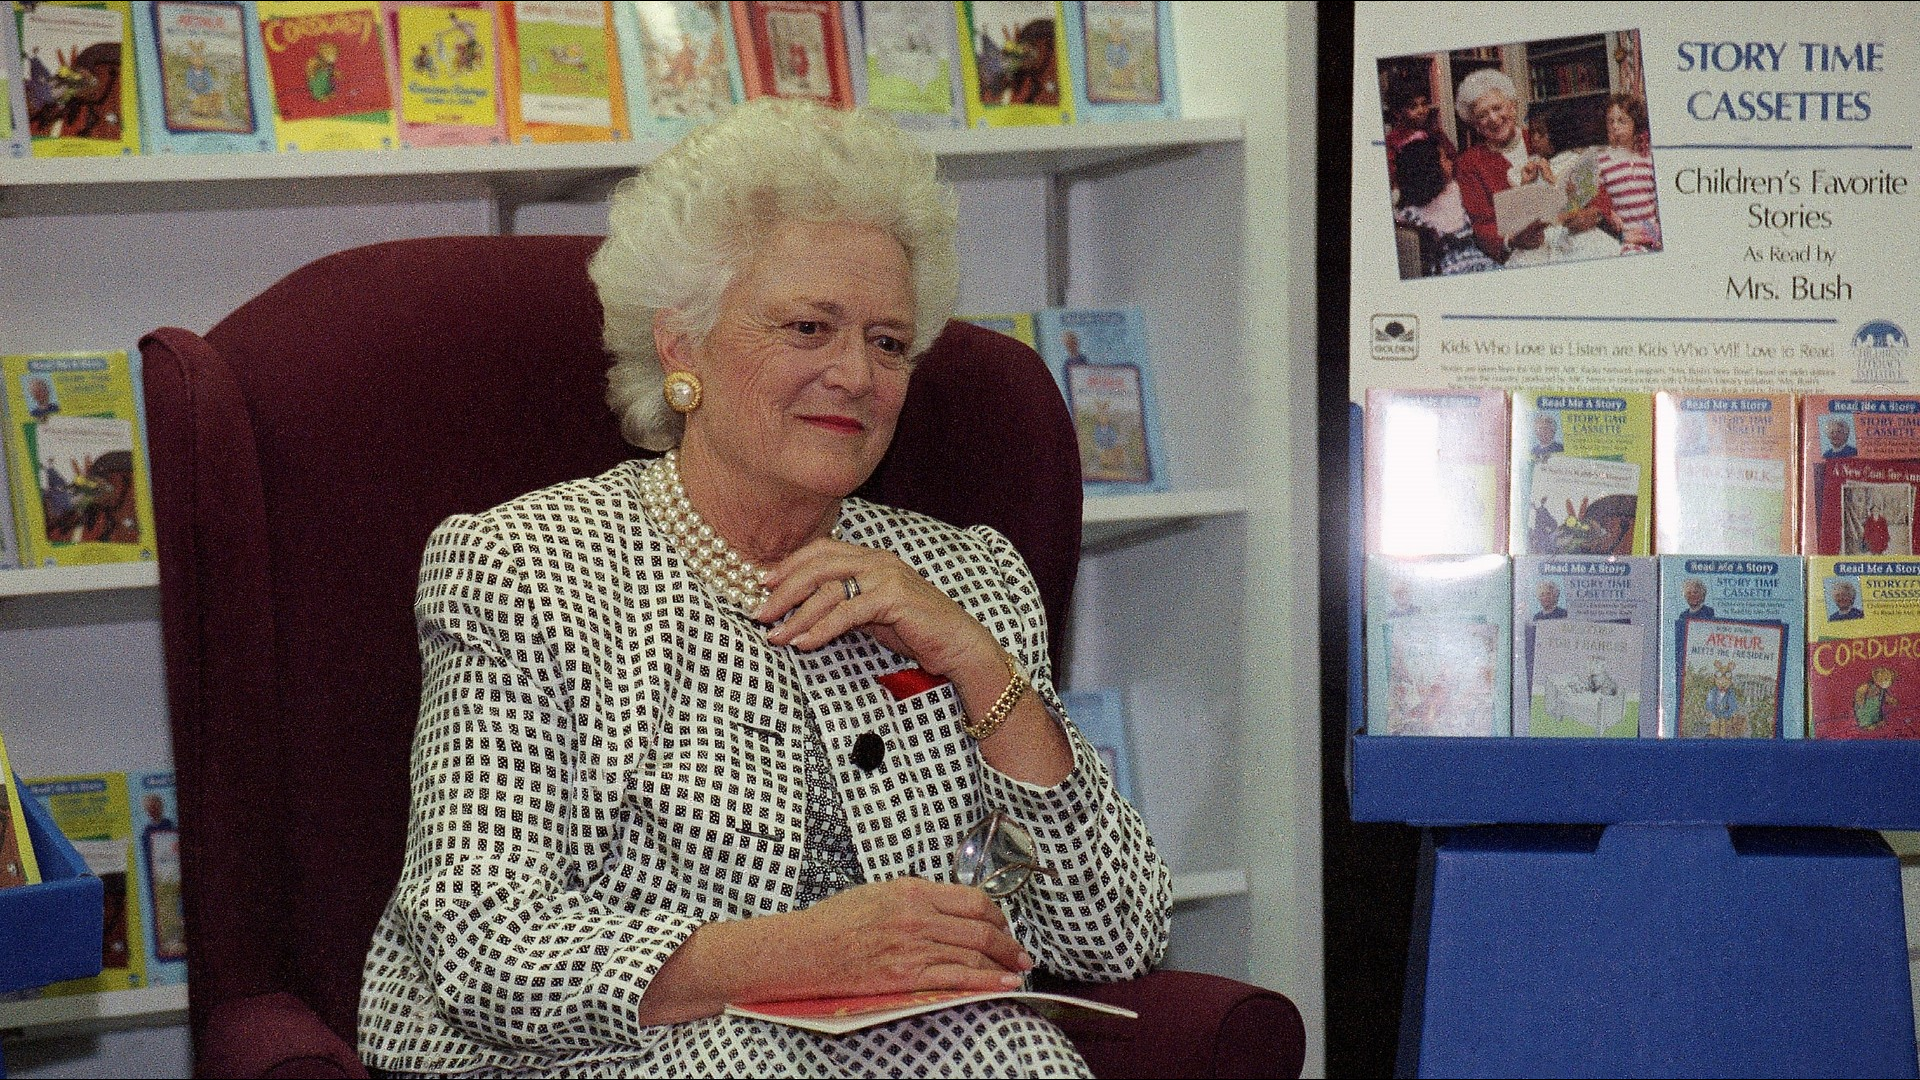 A brand-new USA TODAY report on the forthcoming Barbara Bush biography says the former first lady blamed President Donald Trump for her “heart attack.”